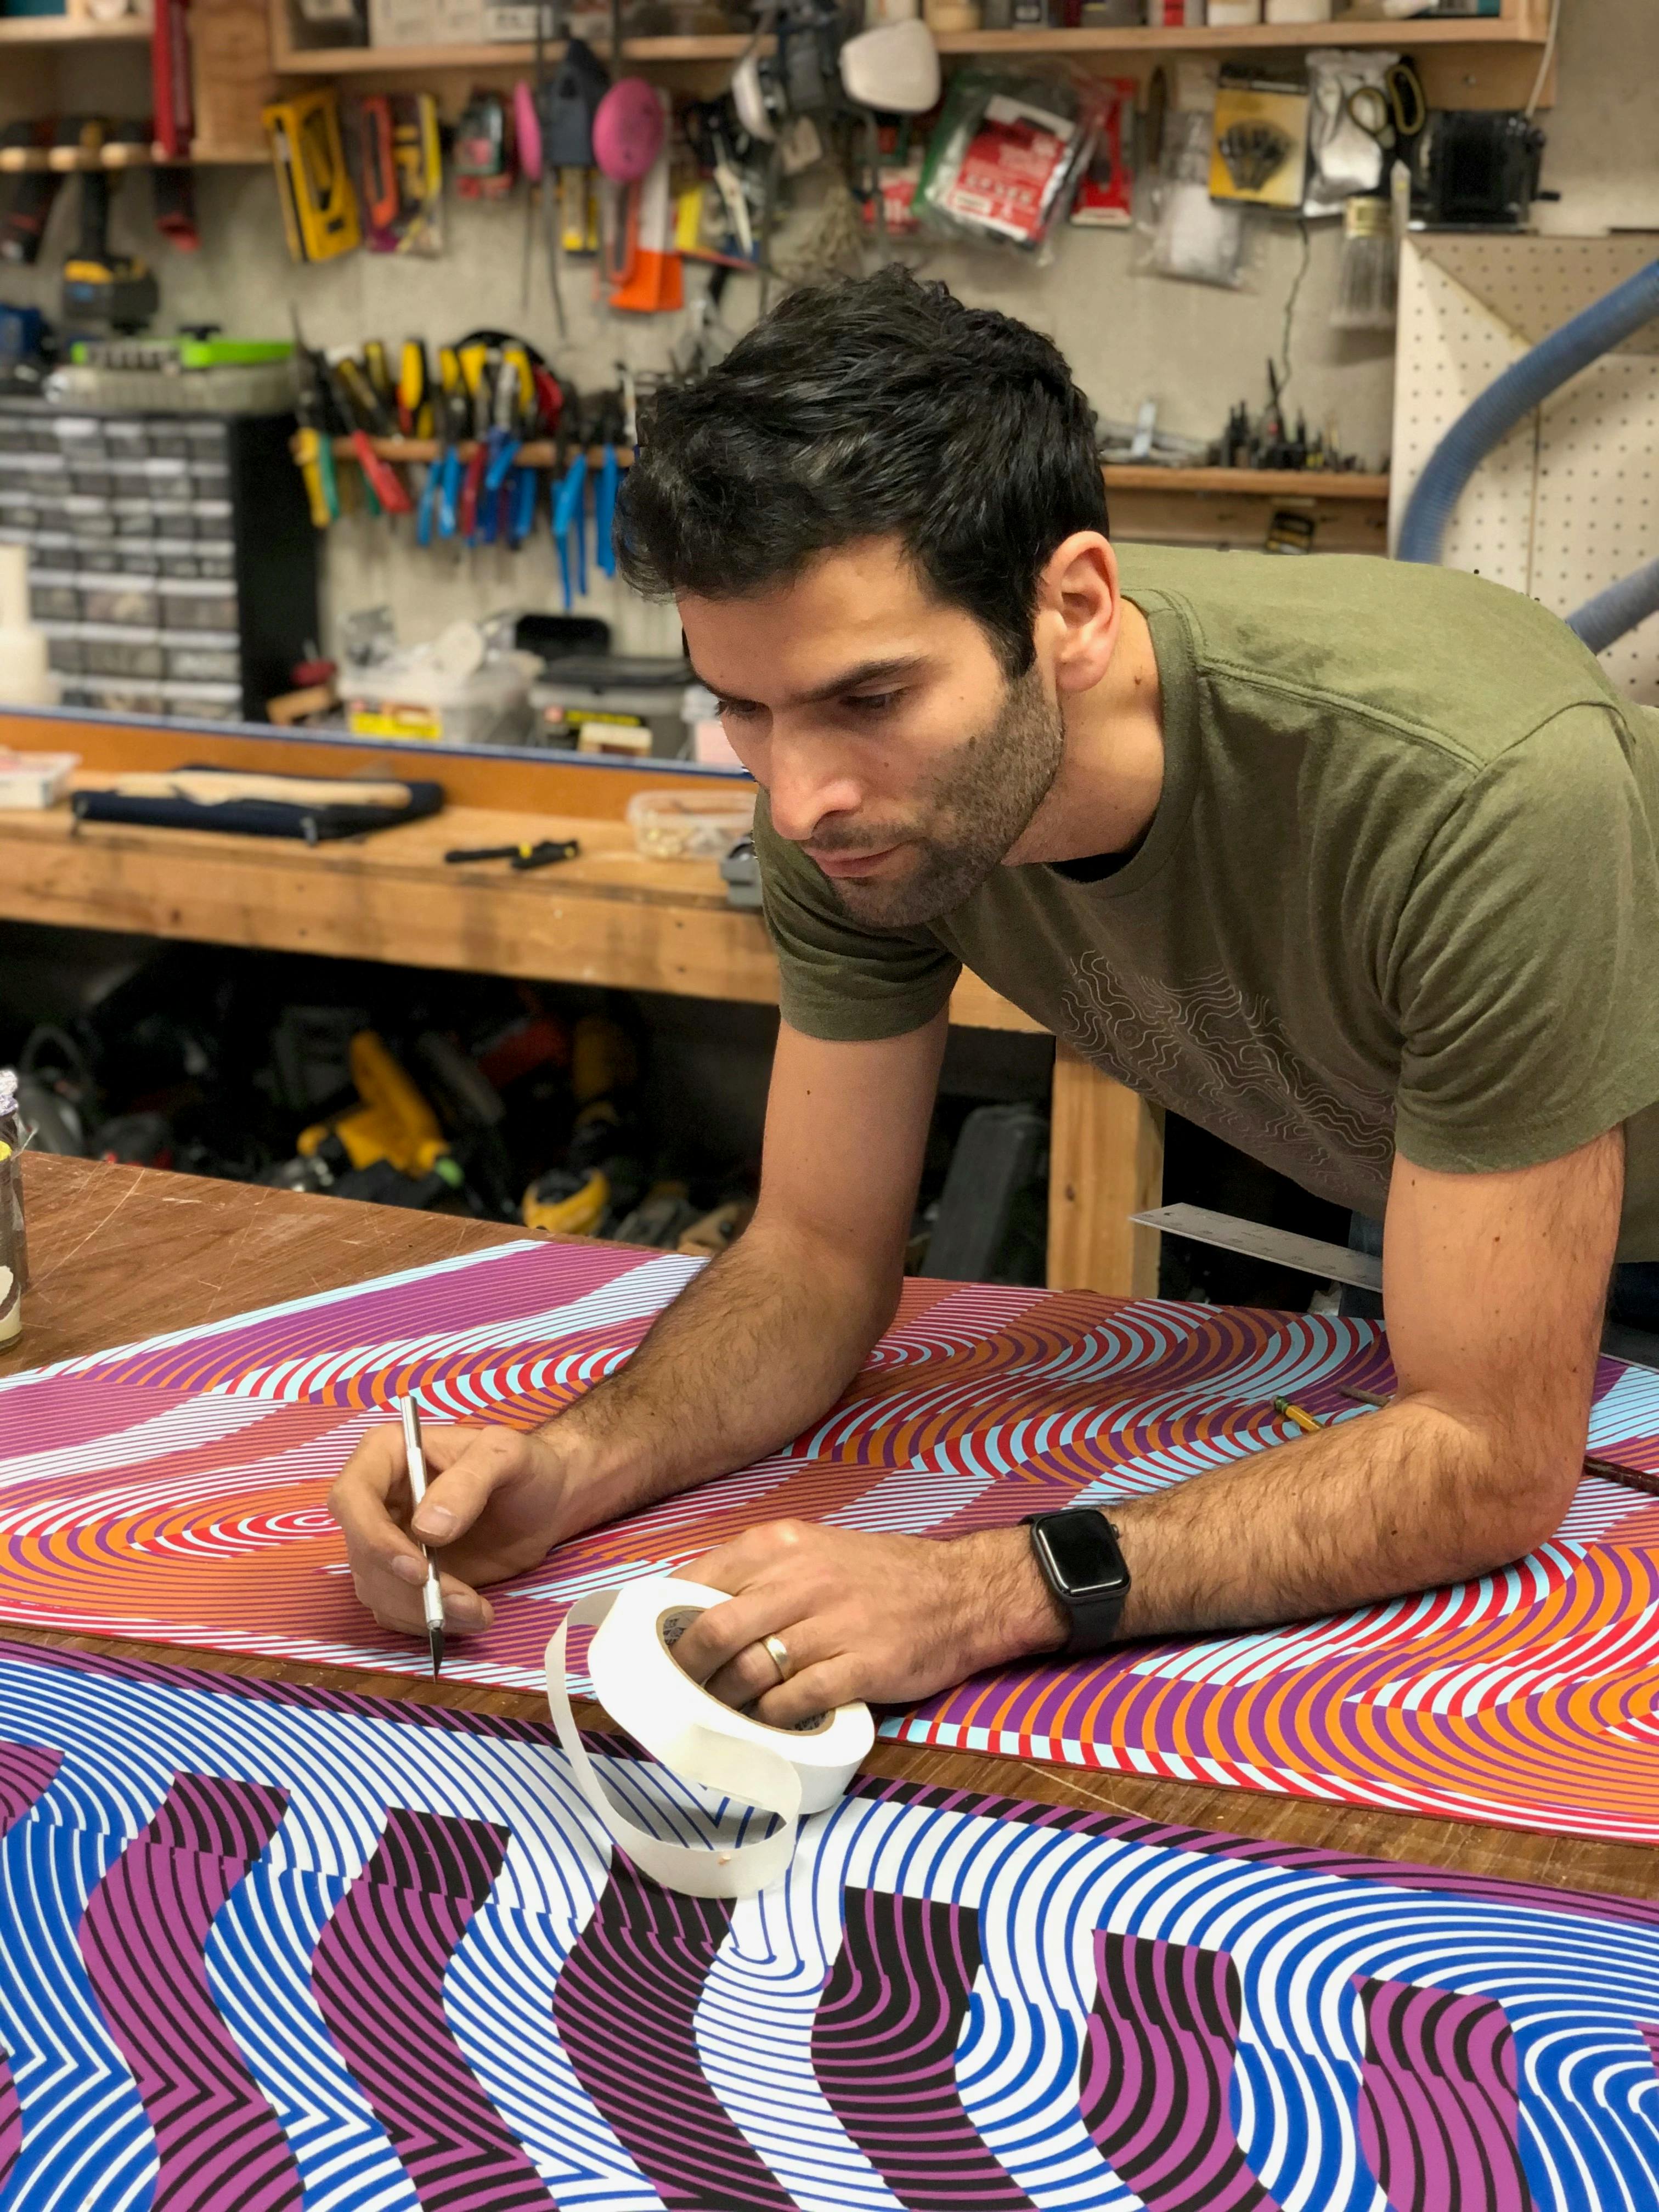 Artist Matt Neuman holding masking tape and leaning over abstract, colorful prints in his studio.